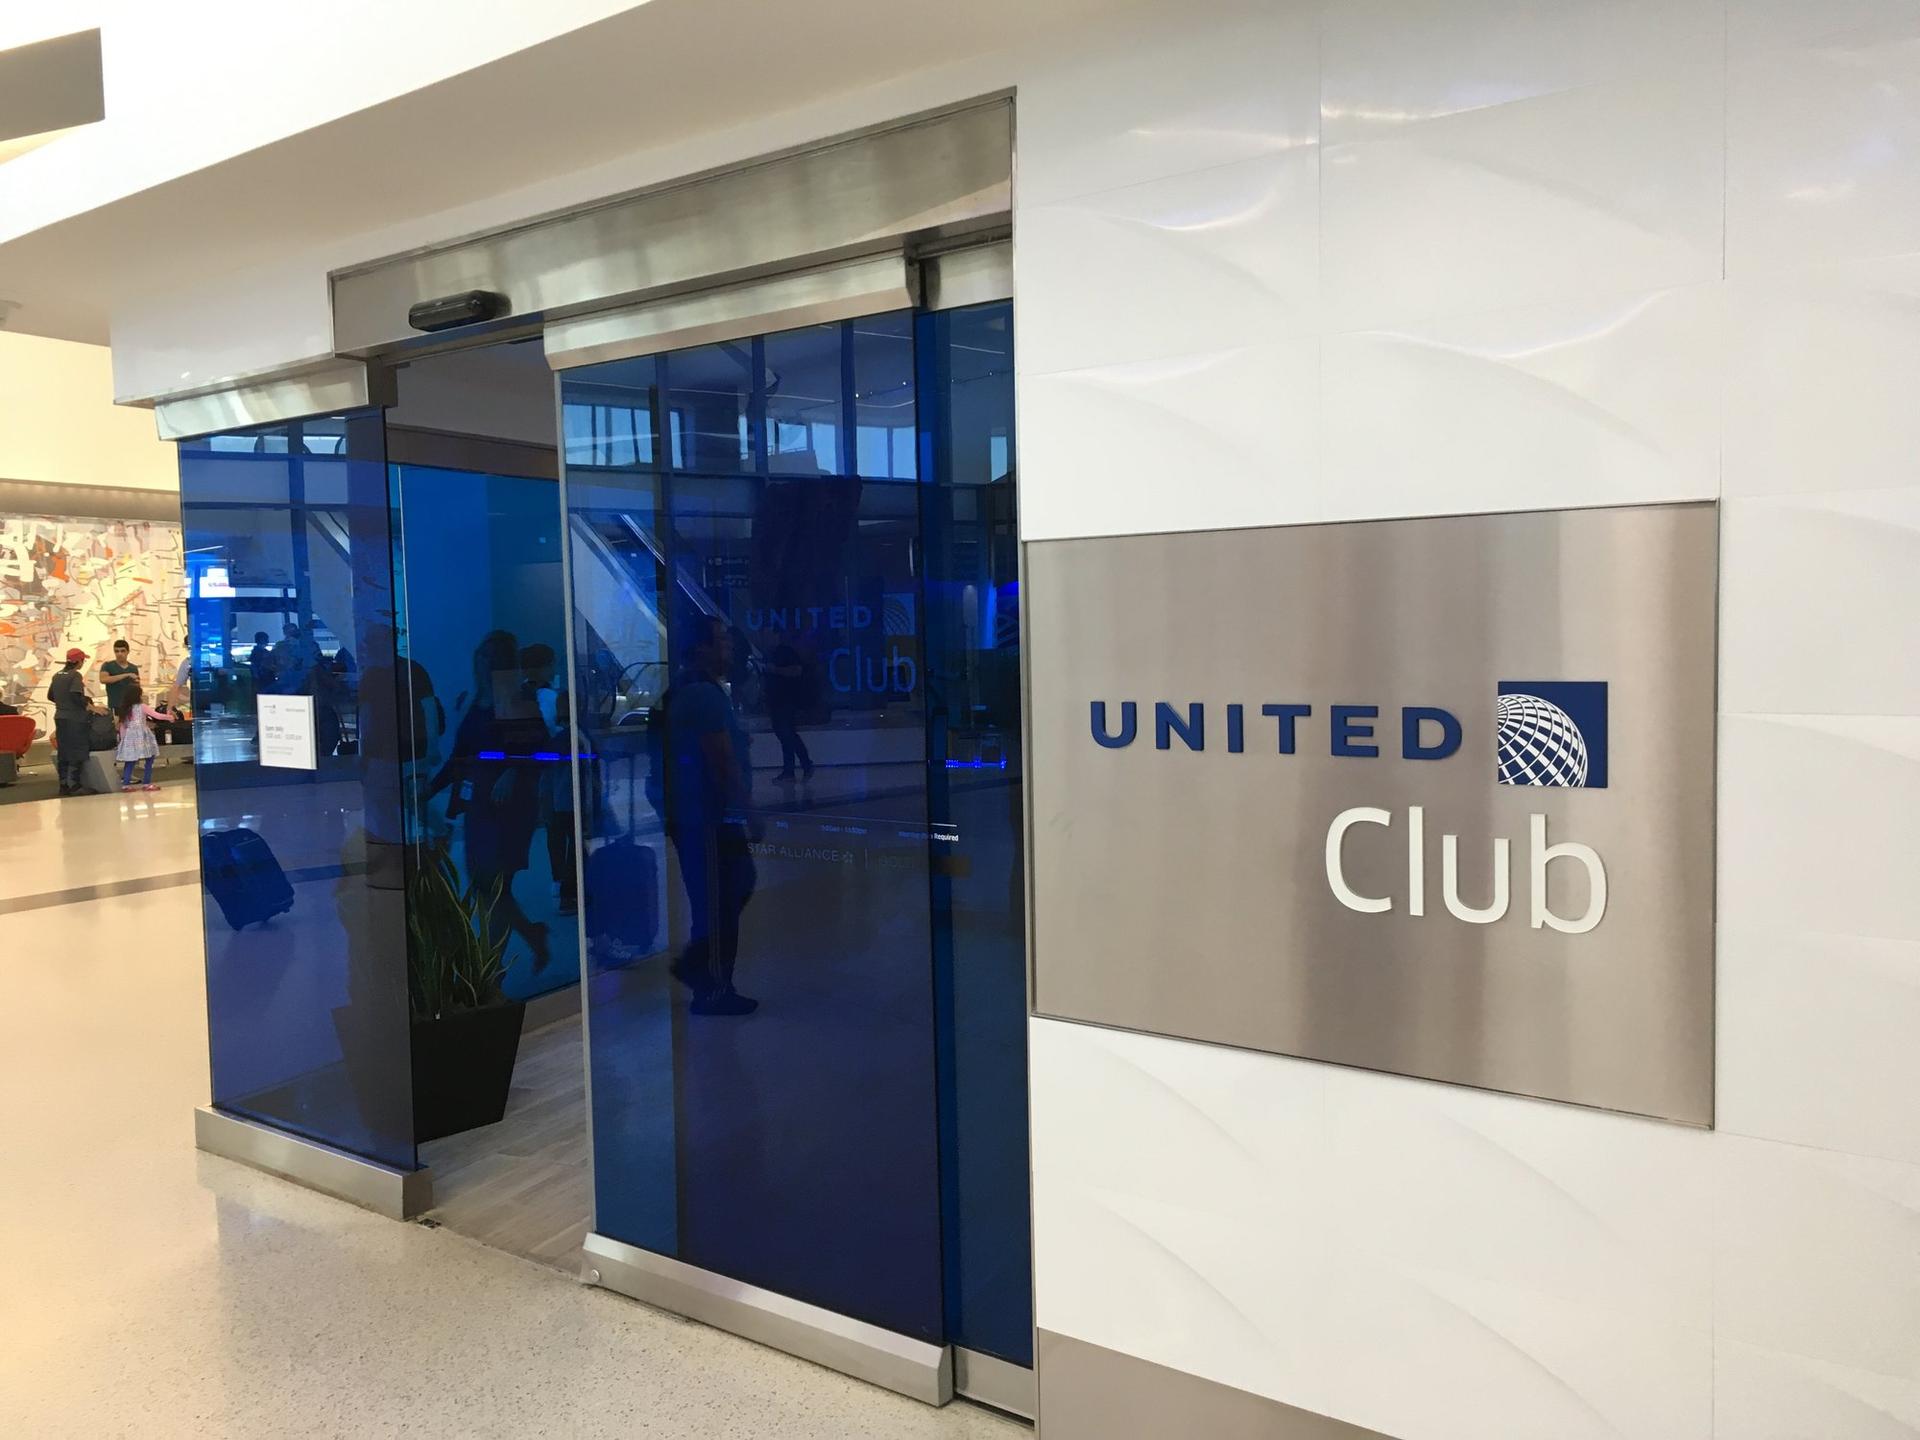 United Airlines United Club image 39 of 43